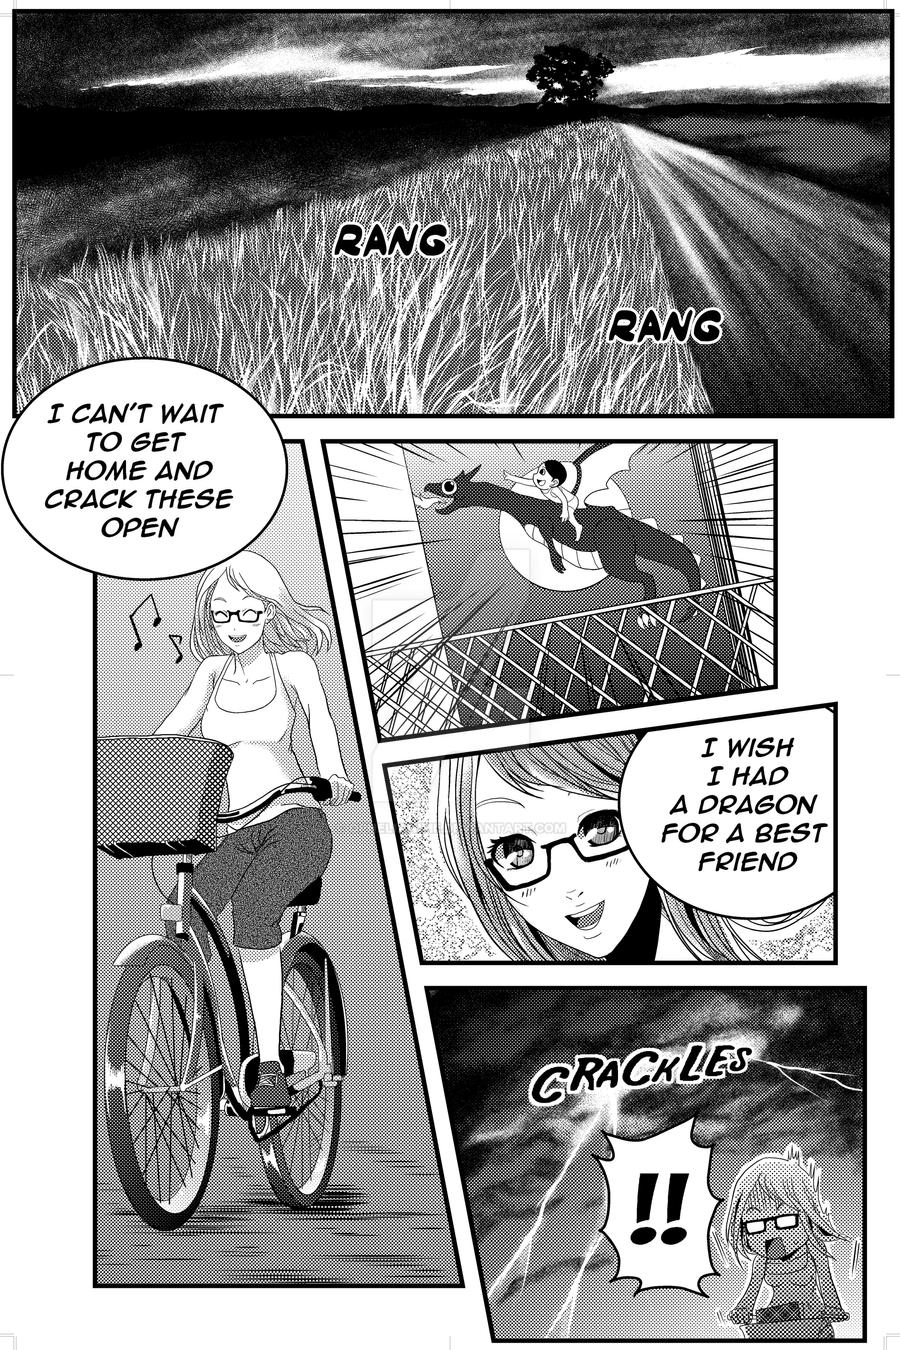 Crossover chapter 1 sample page 1